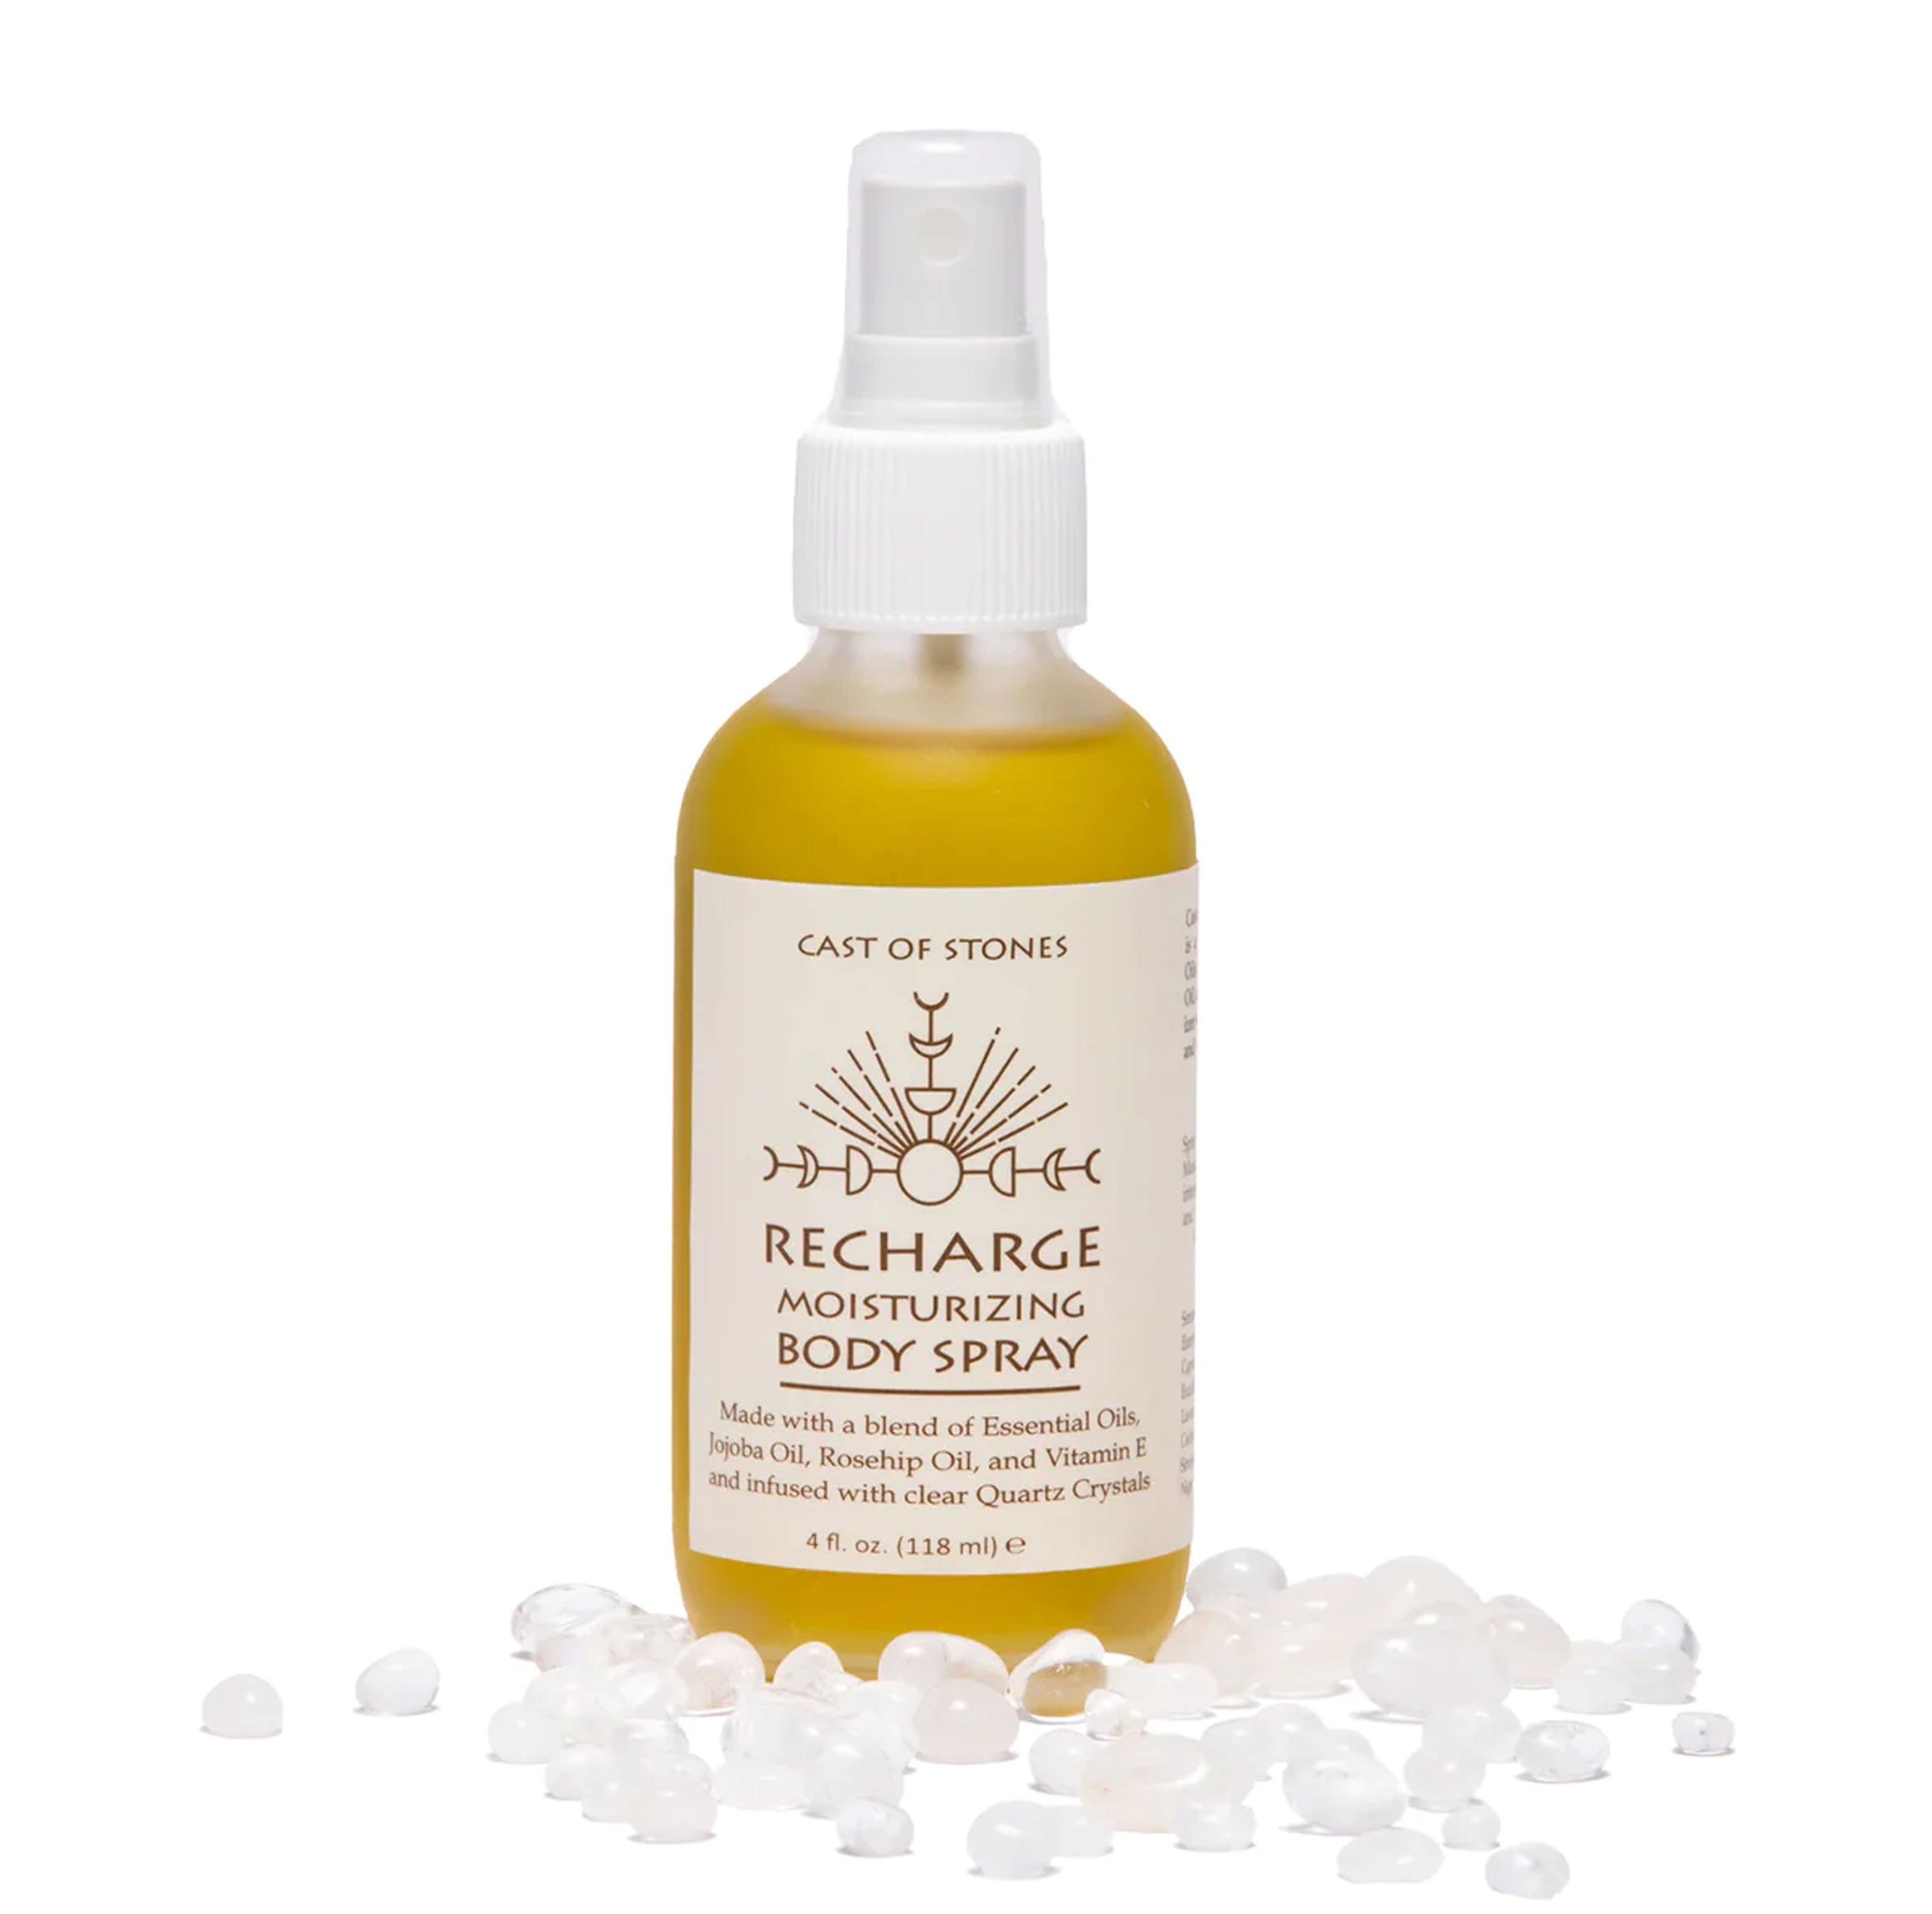 RECHARGE MOISTURIZING SPRAY WITH CLEAR QUARTZ CRYSTALS